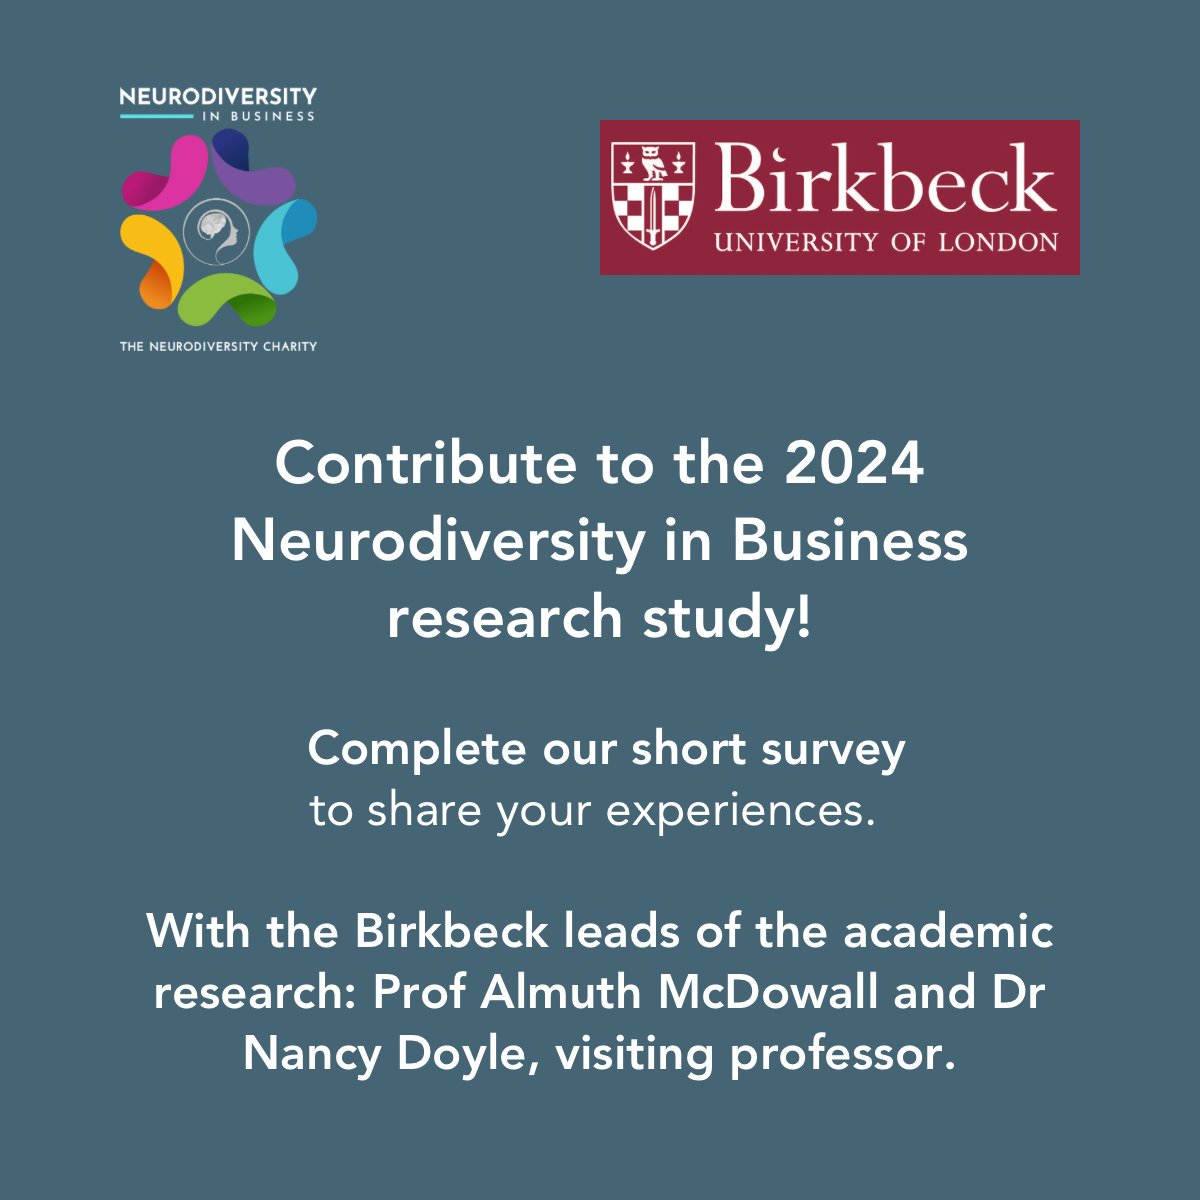 📢 Calling all employers! We need your input today for our transformational 2024 Neurodiversity in Business and Work research study. Complete the survey: bit.ly/3tp0RCb #Neurodiversity #NeurodiversityInBusiness #NeurodiversityAtWork